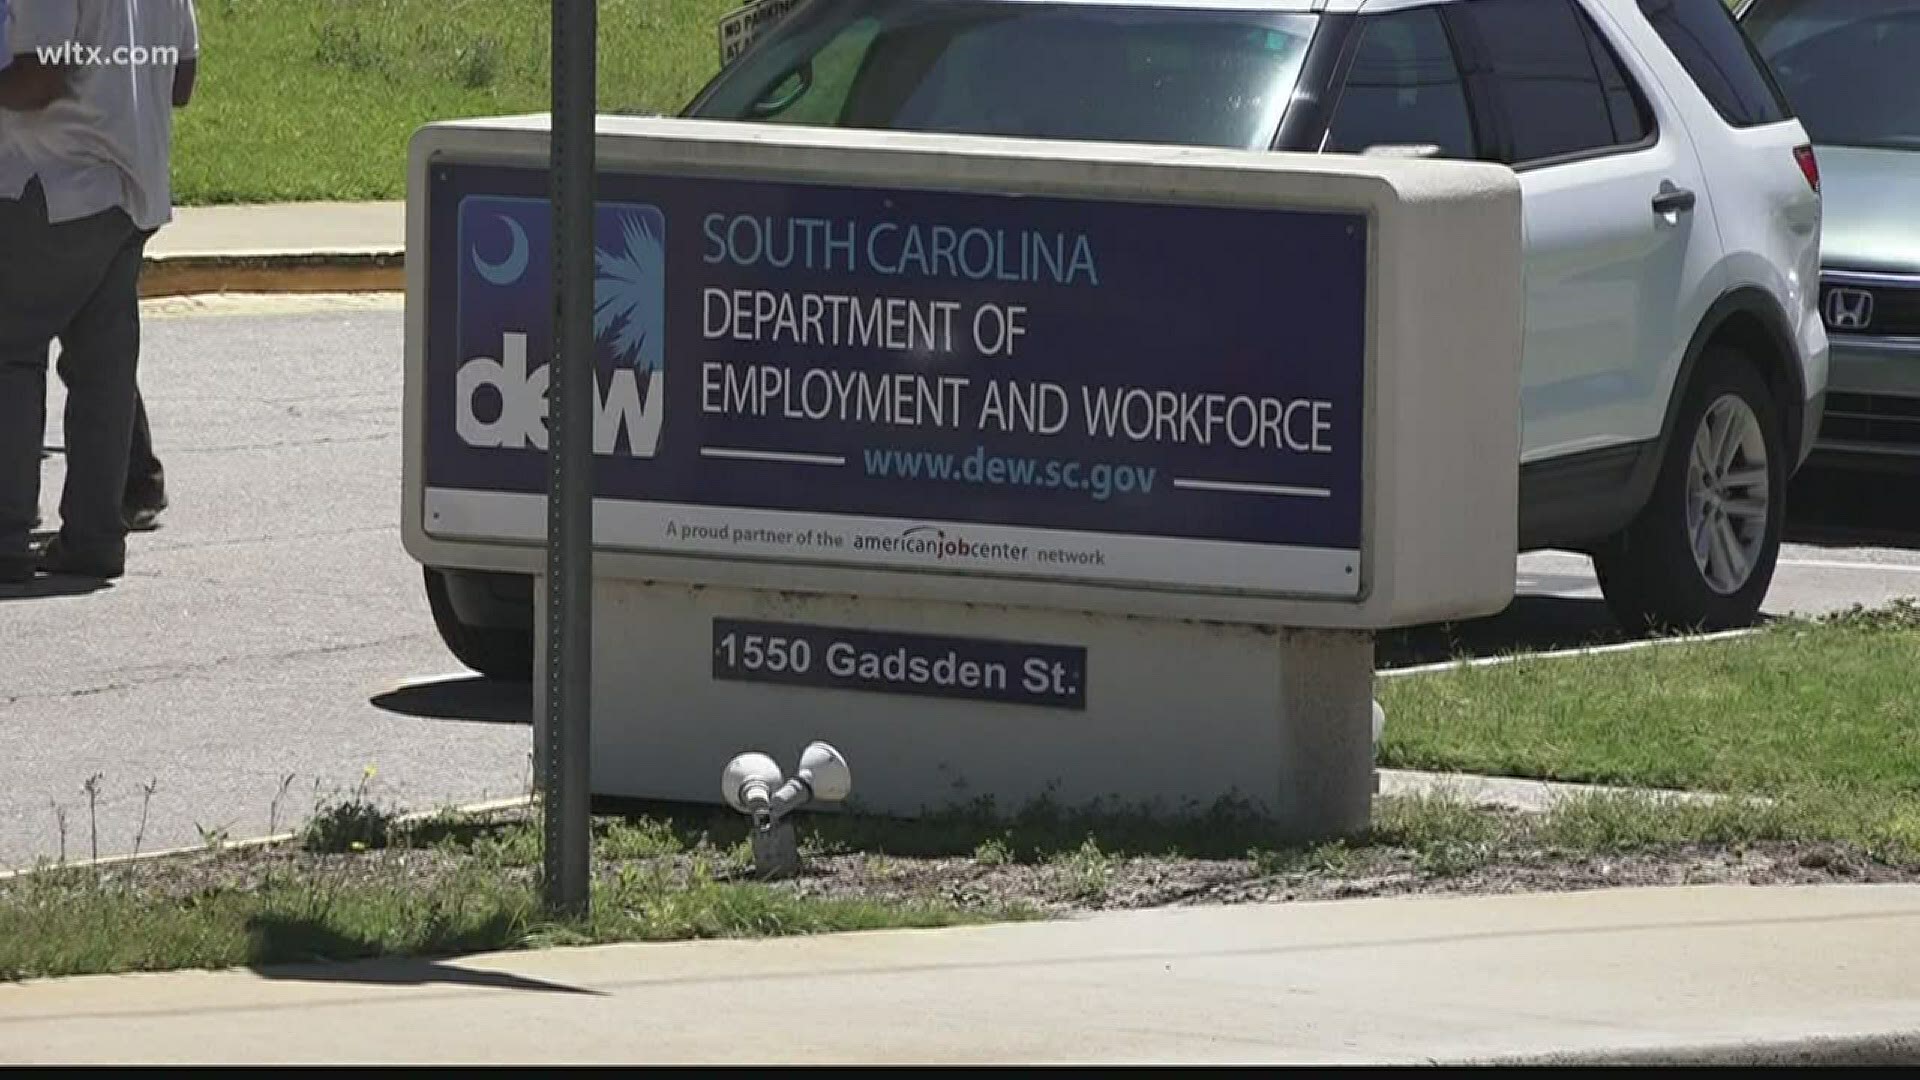 Since the beginning of the pandemic… South Carolina has sent out more than a billion dollars to more than 500-thousand people filing for unemployment benefits.